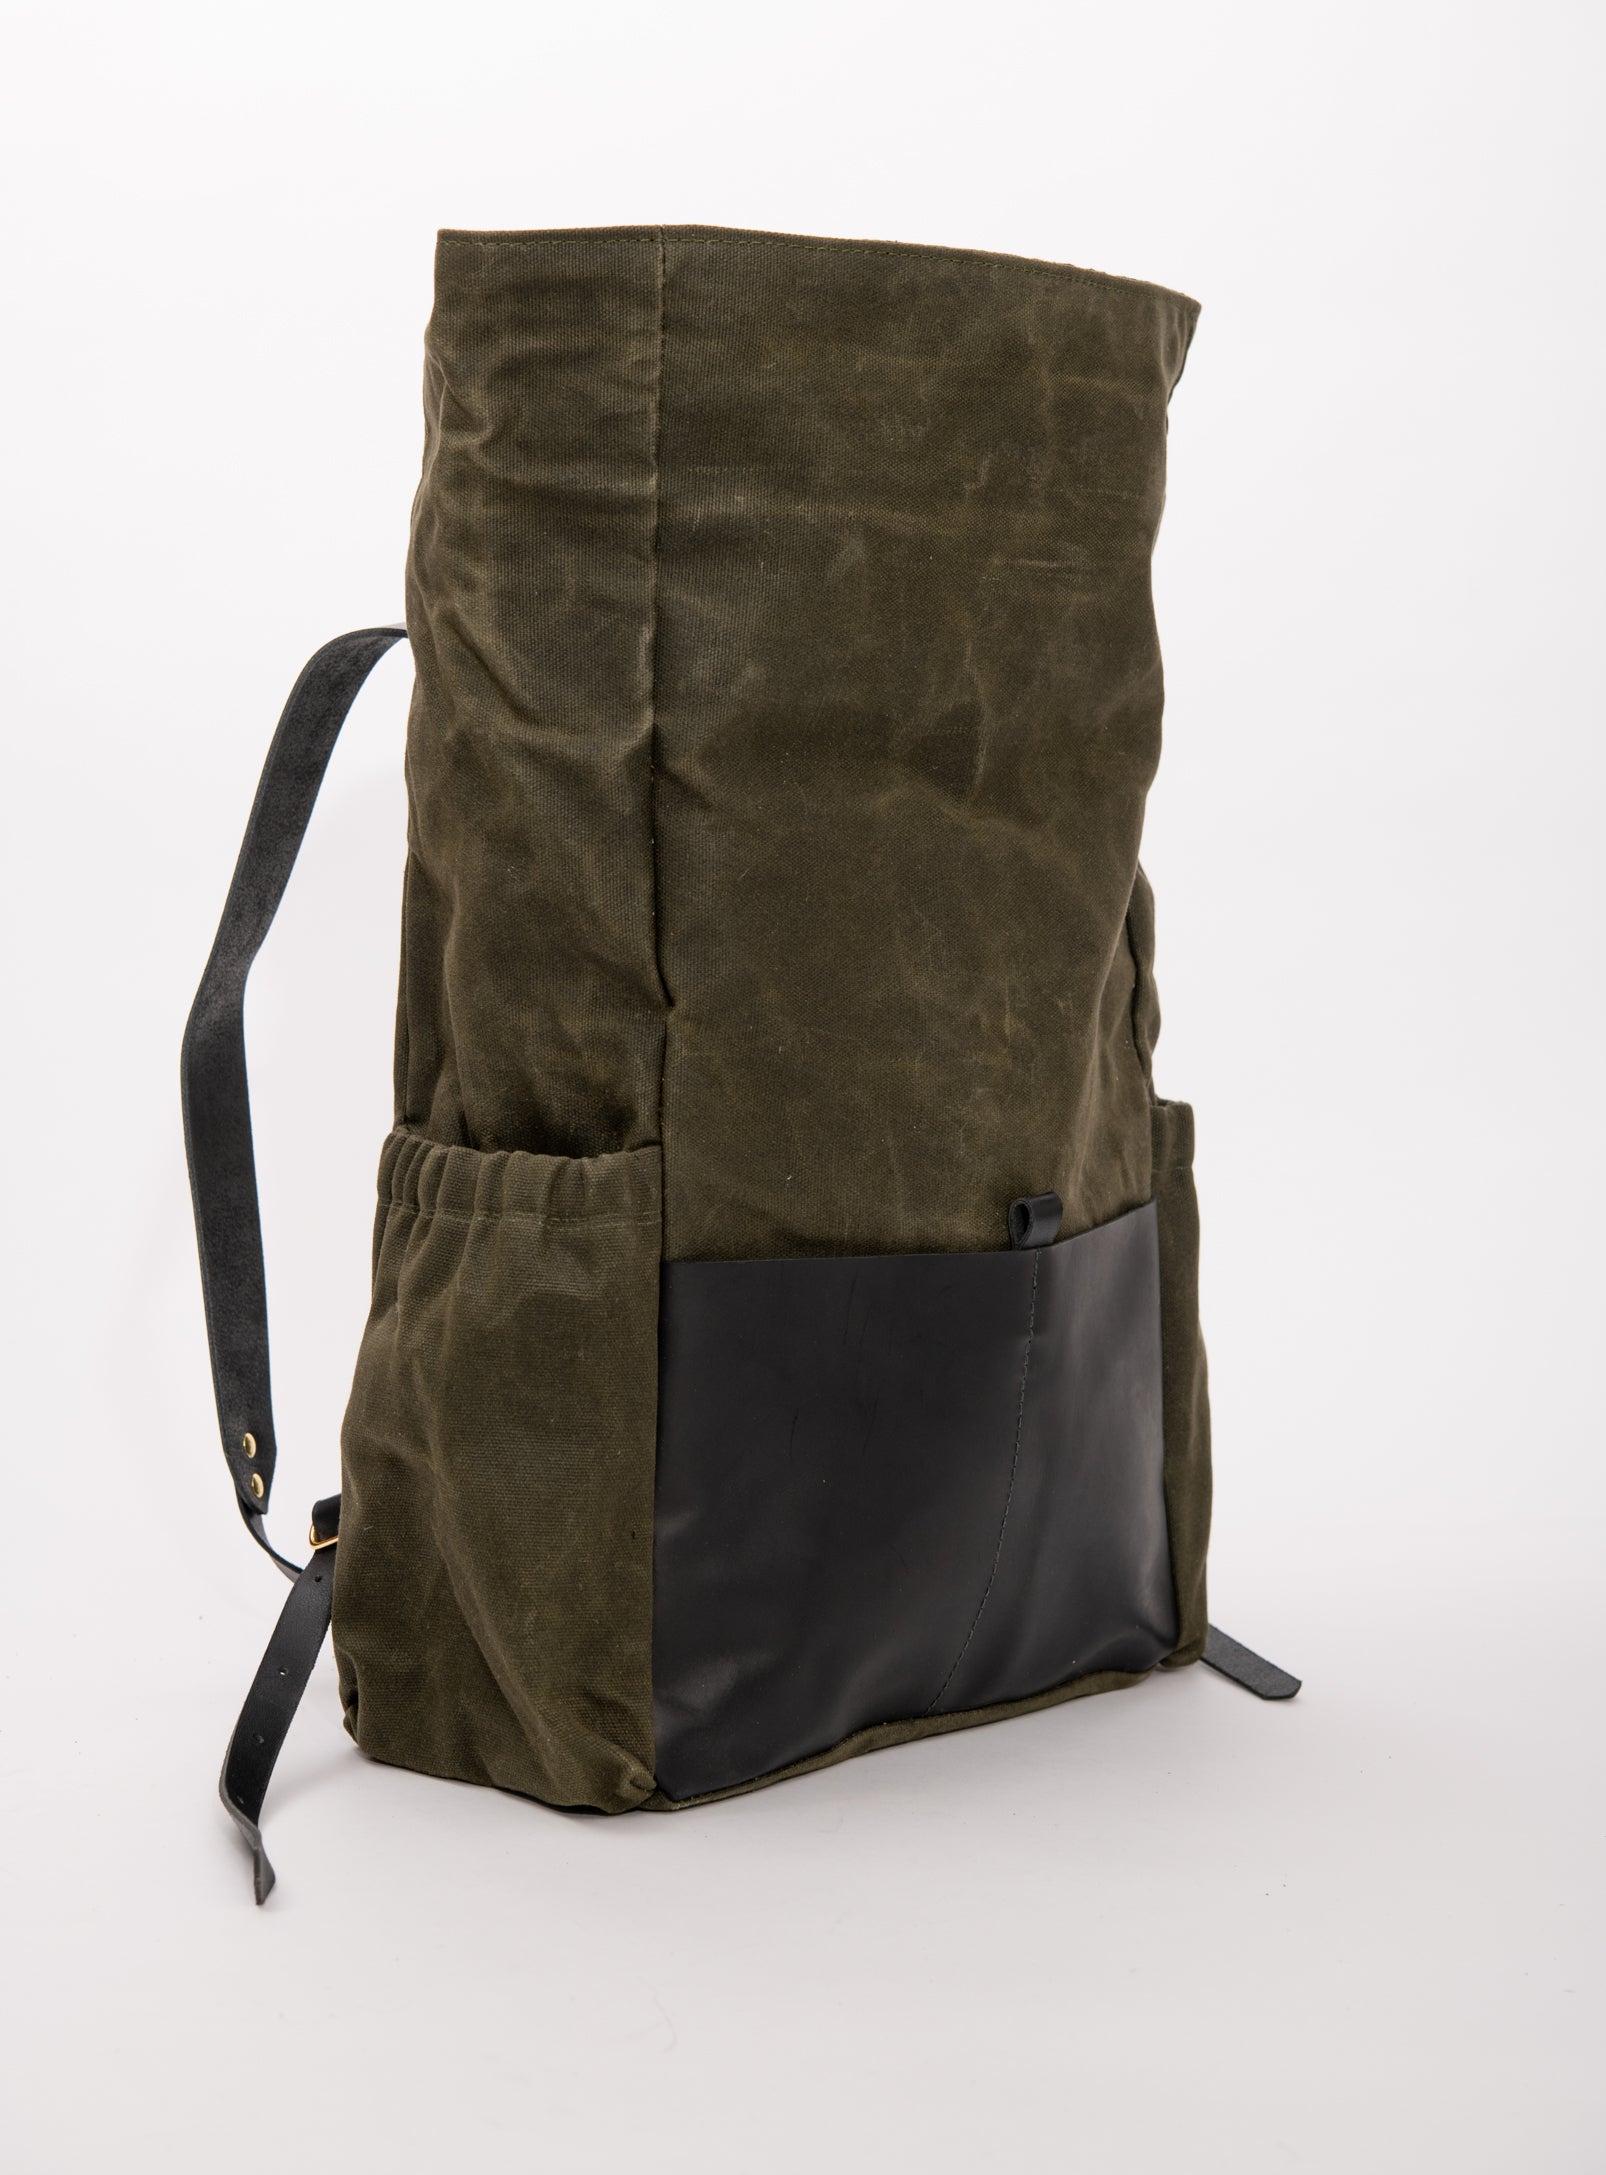 Roll top leather and waxed coton backpack DE LORIMIER model – Veinage